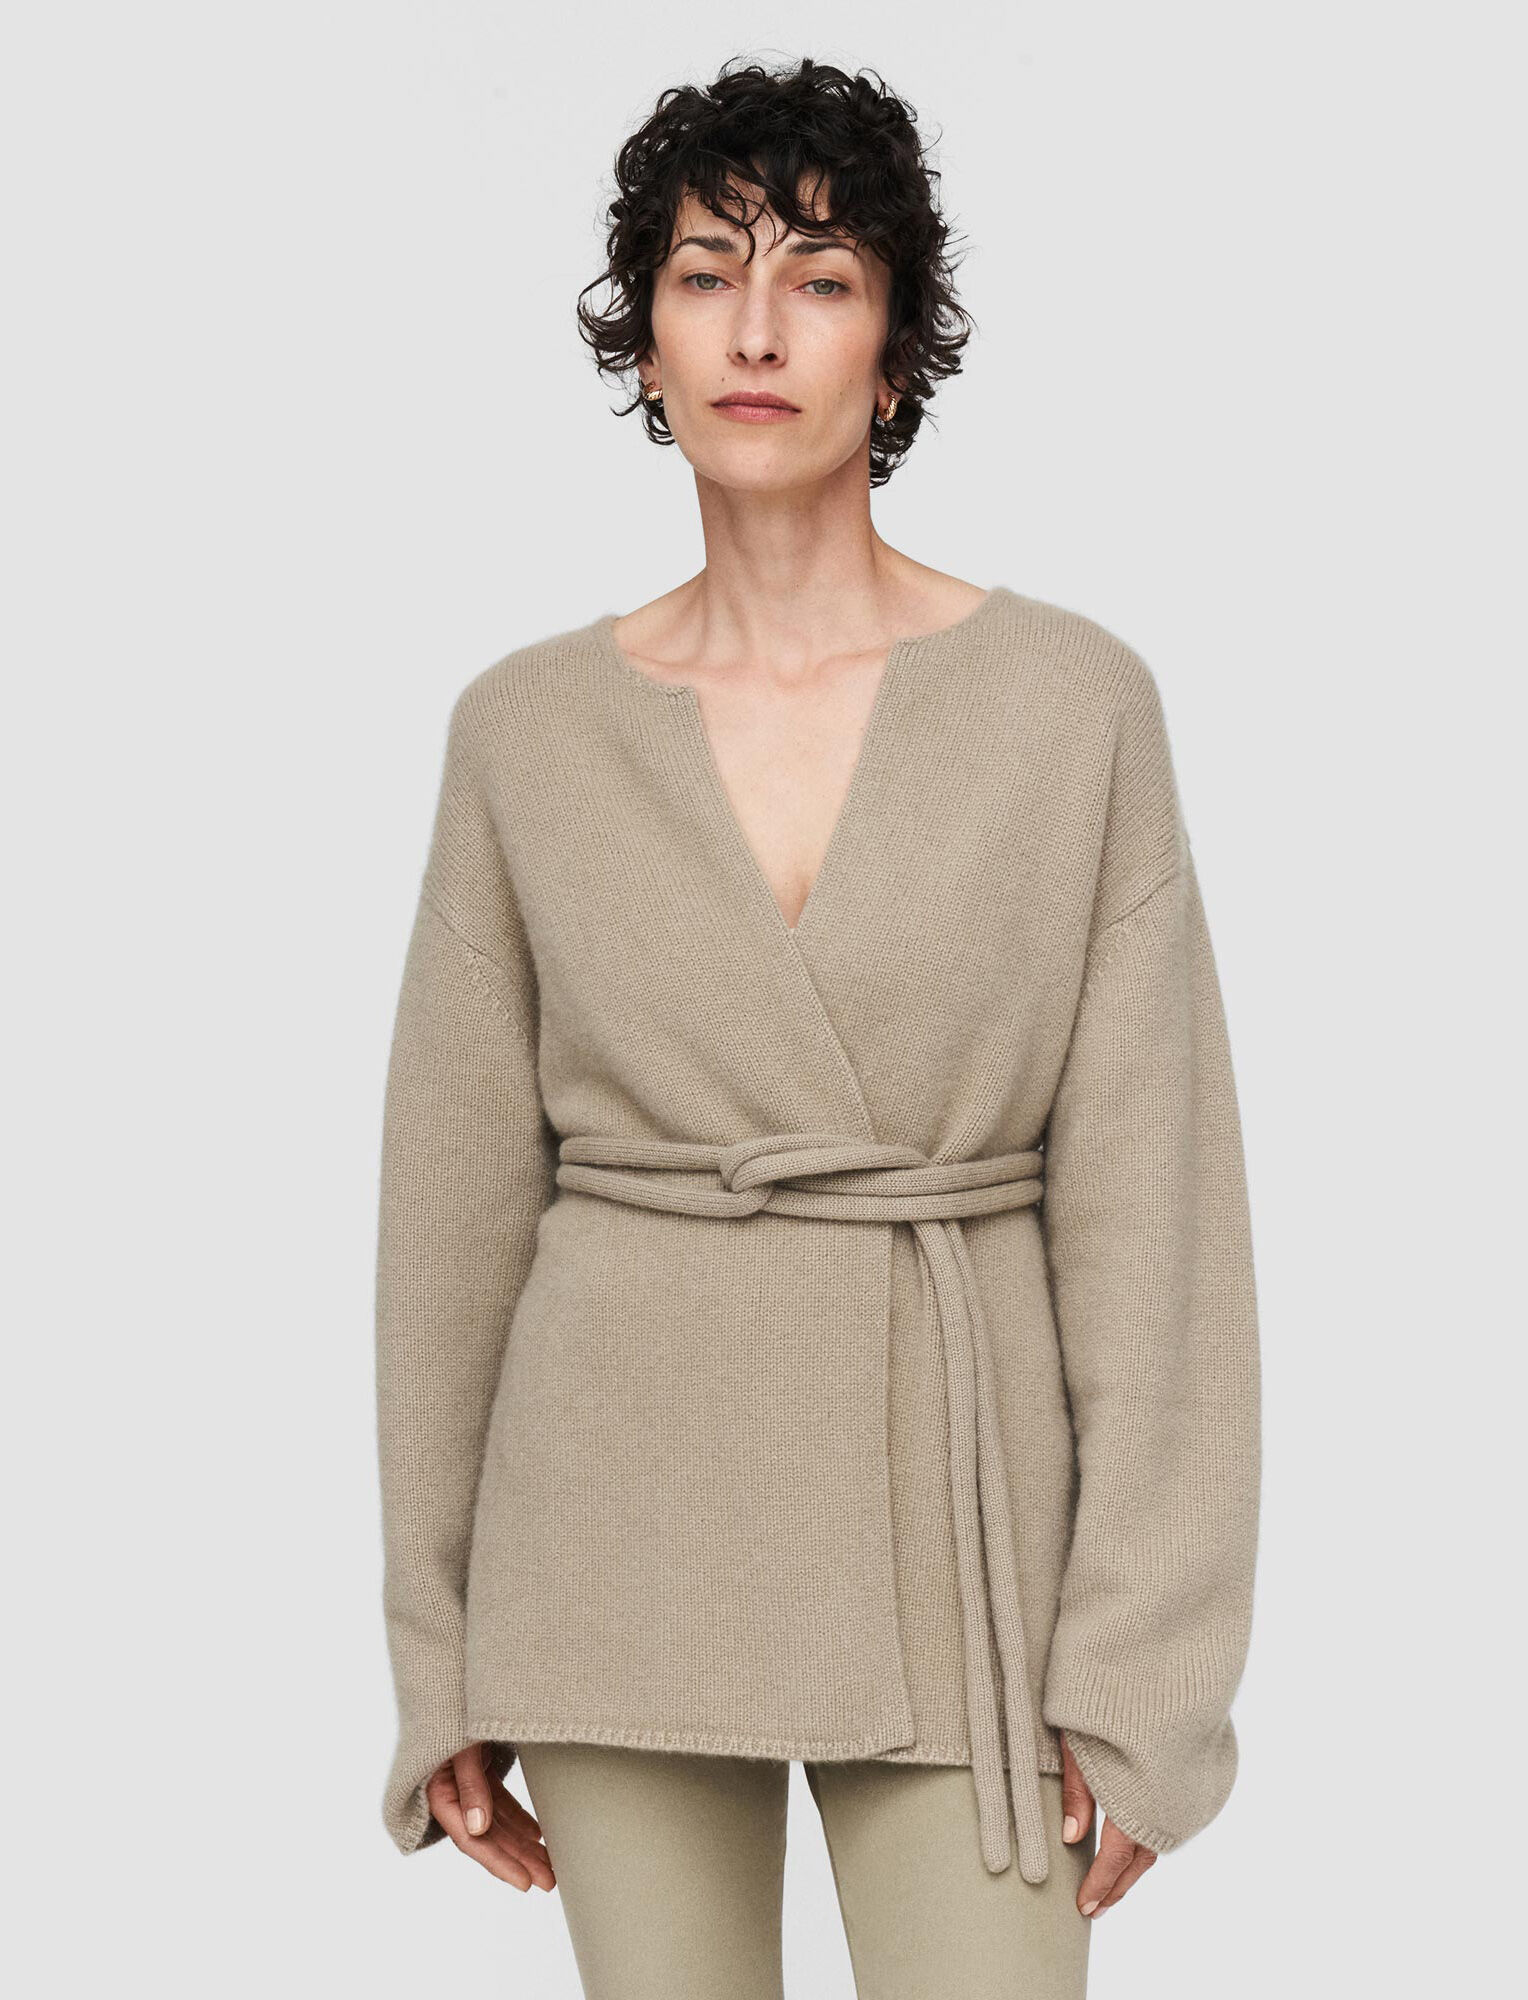 Joseph, Luxe Cashmere Cardigan, in Pewter